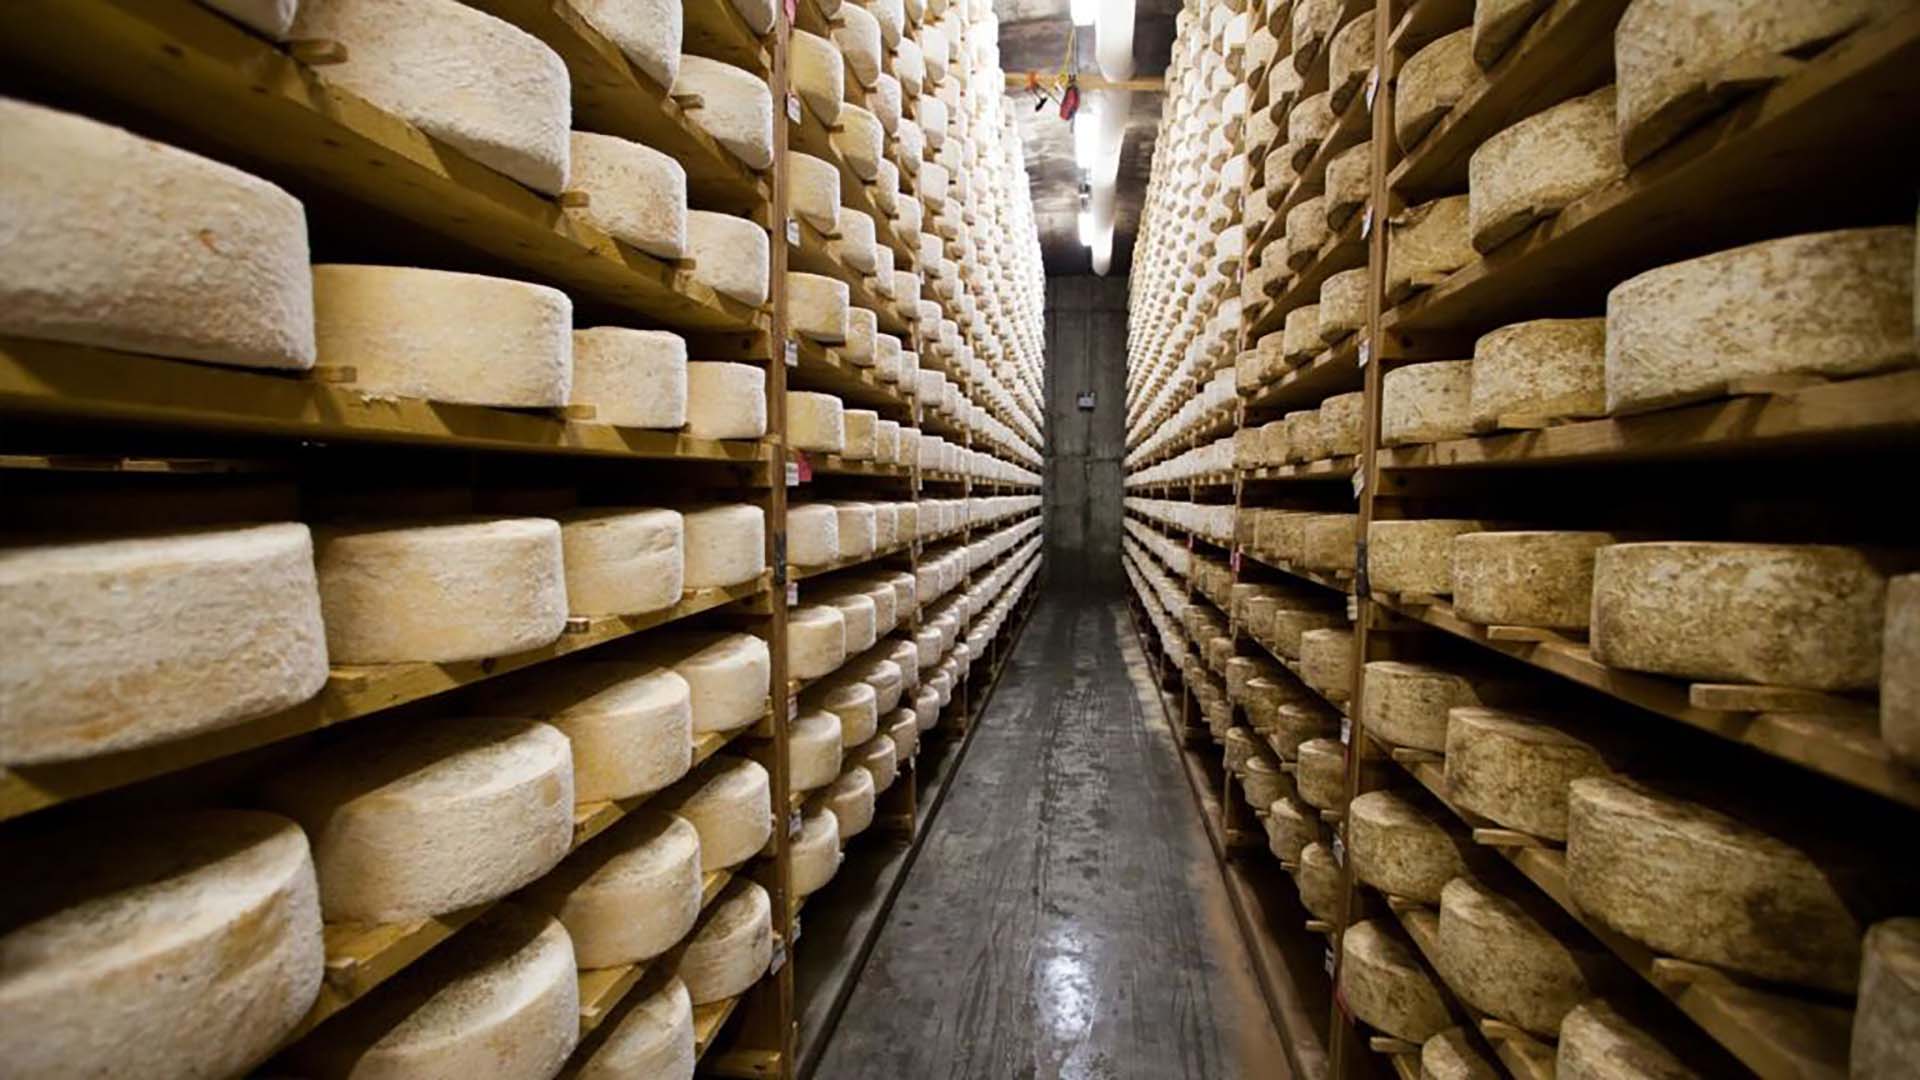 A warehouse filled with cheese.